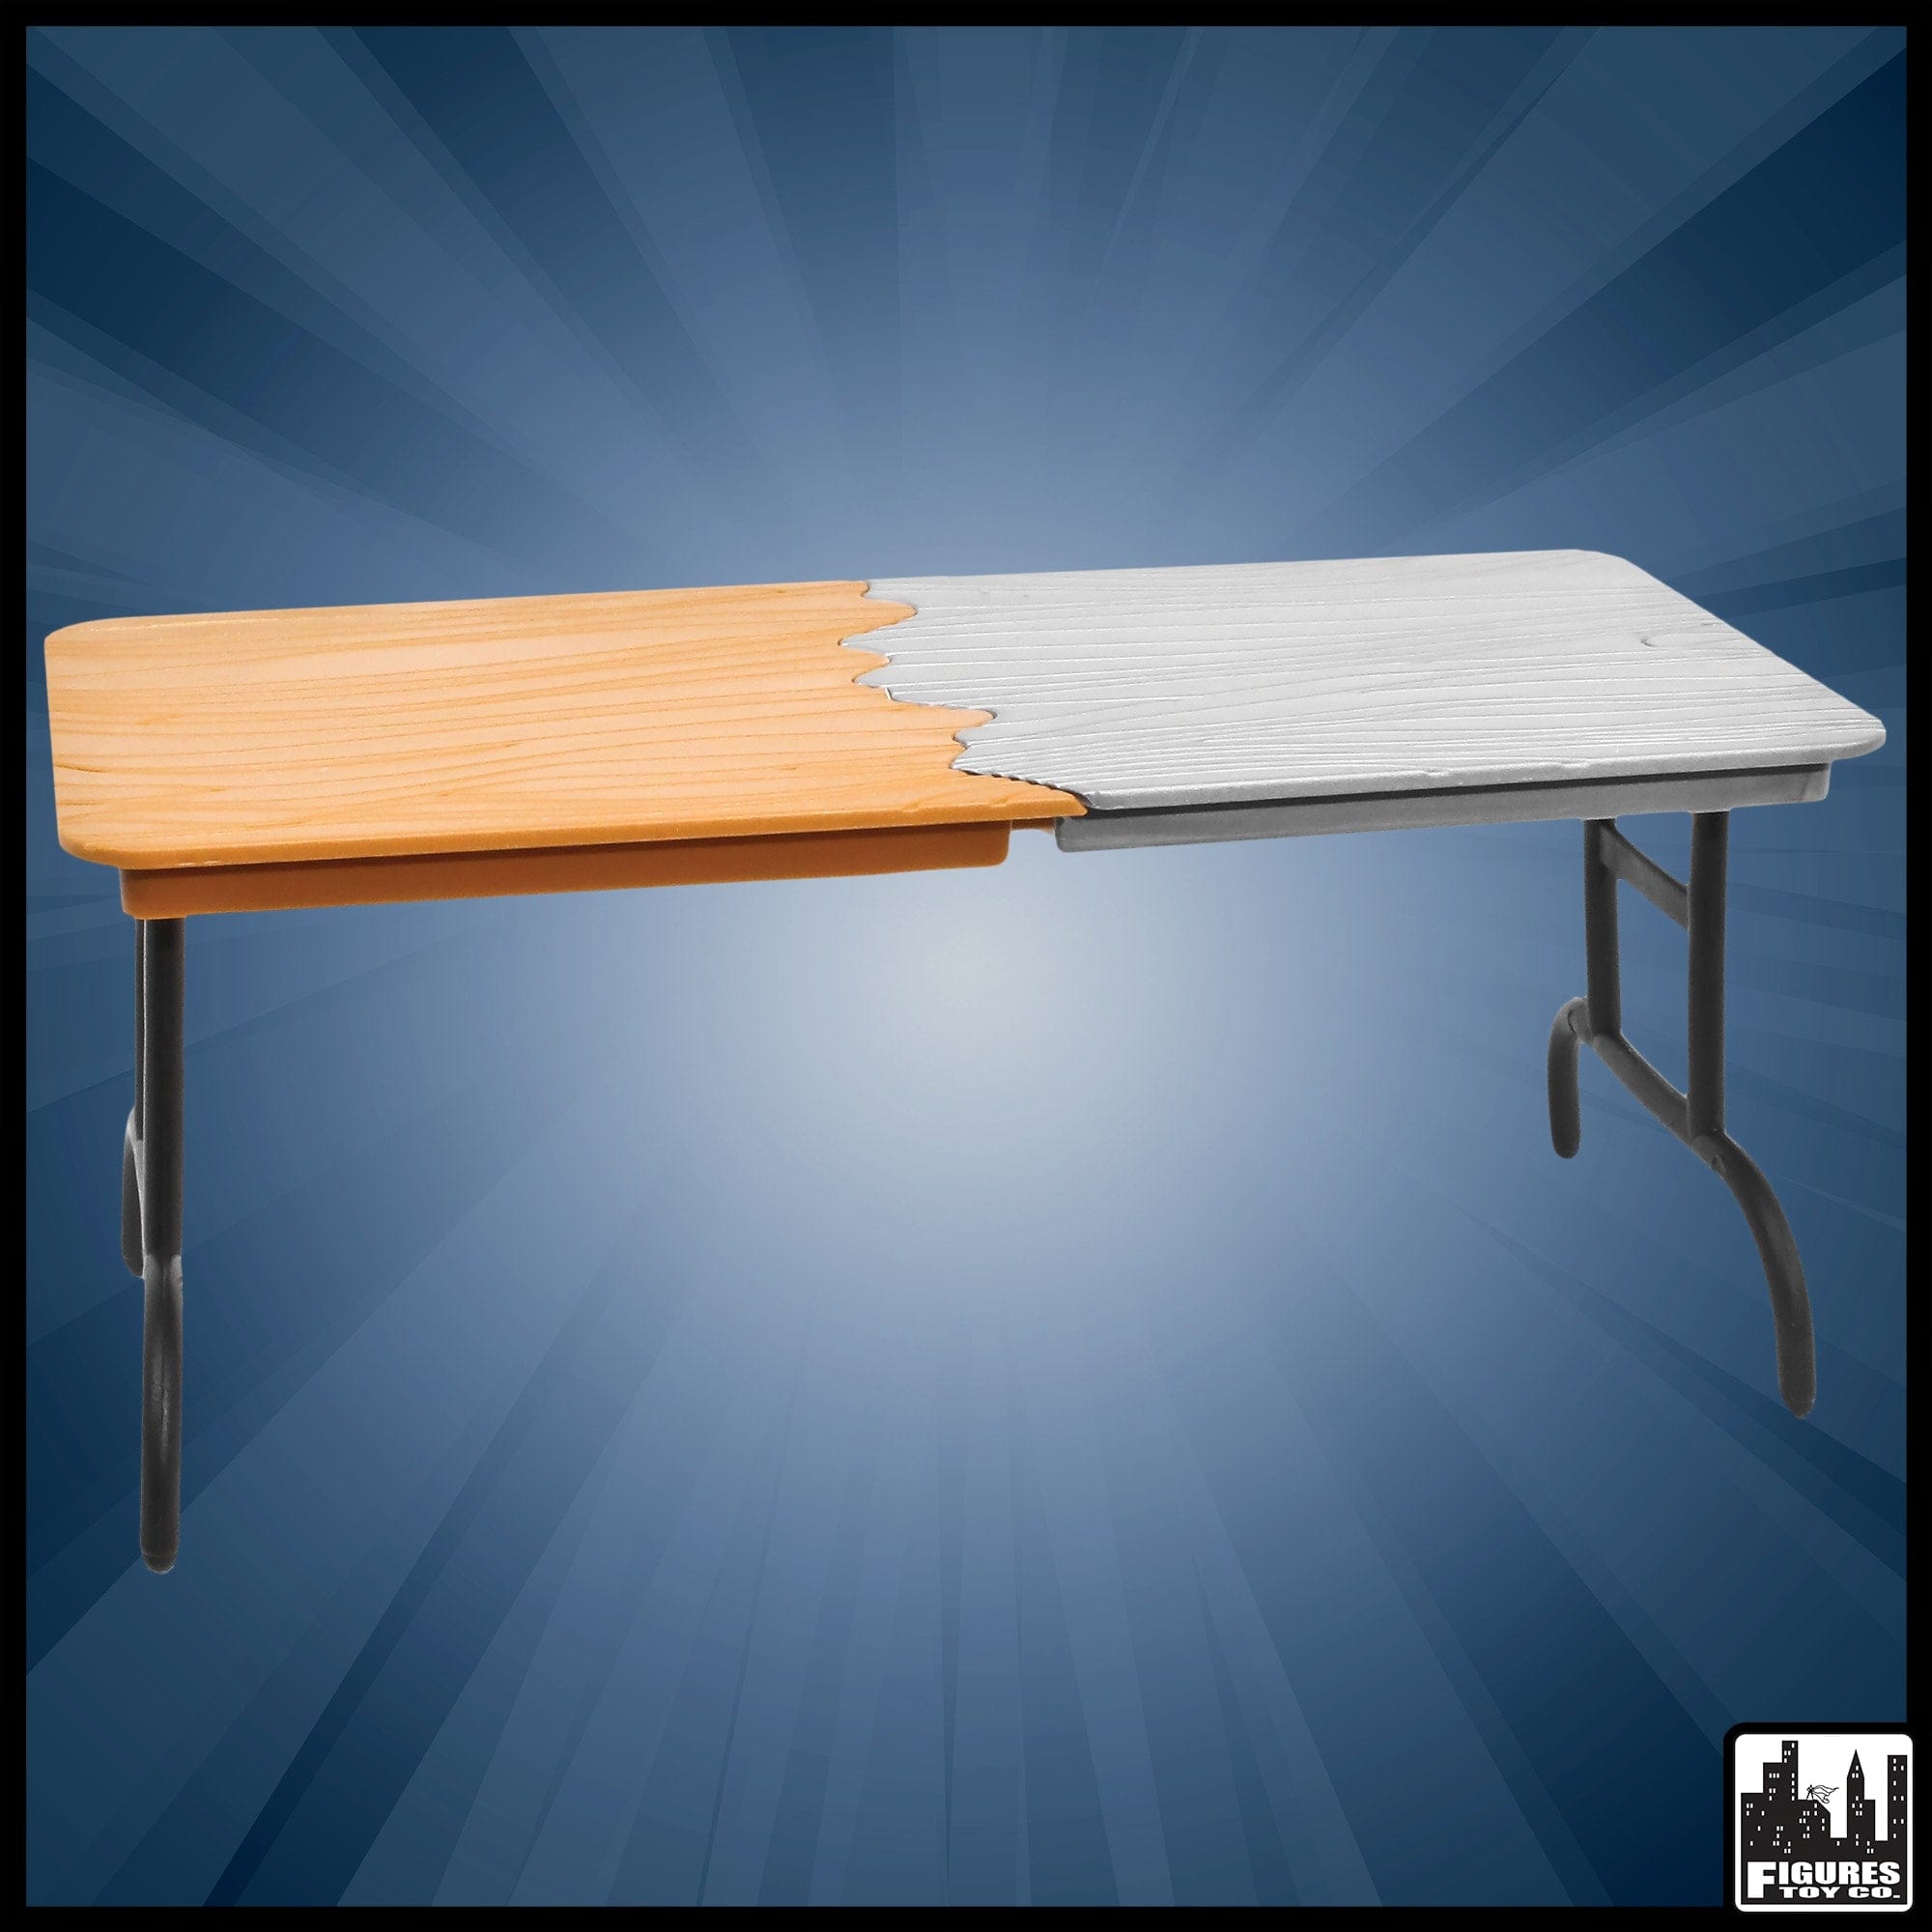 Half Brown & Half Silver Breakable Table for WWE Wrestling Action Figures